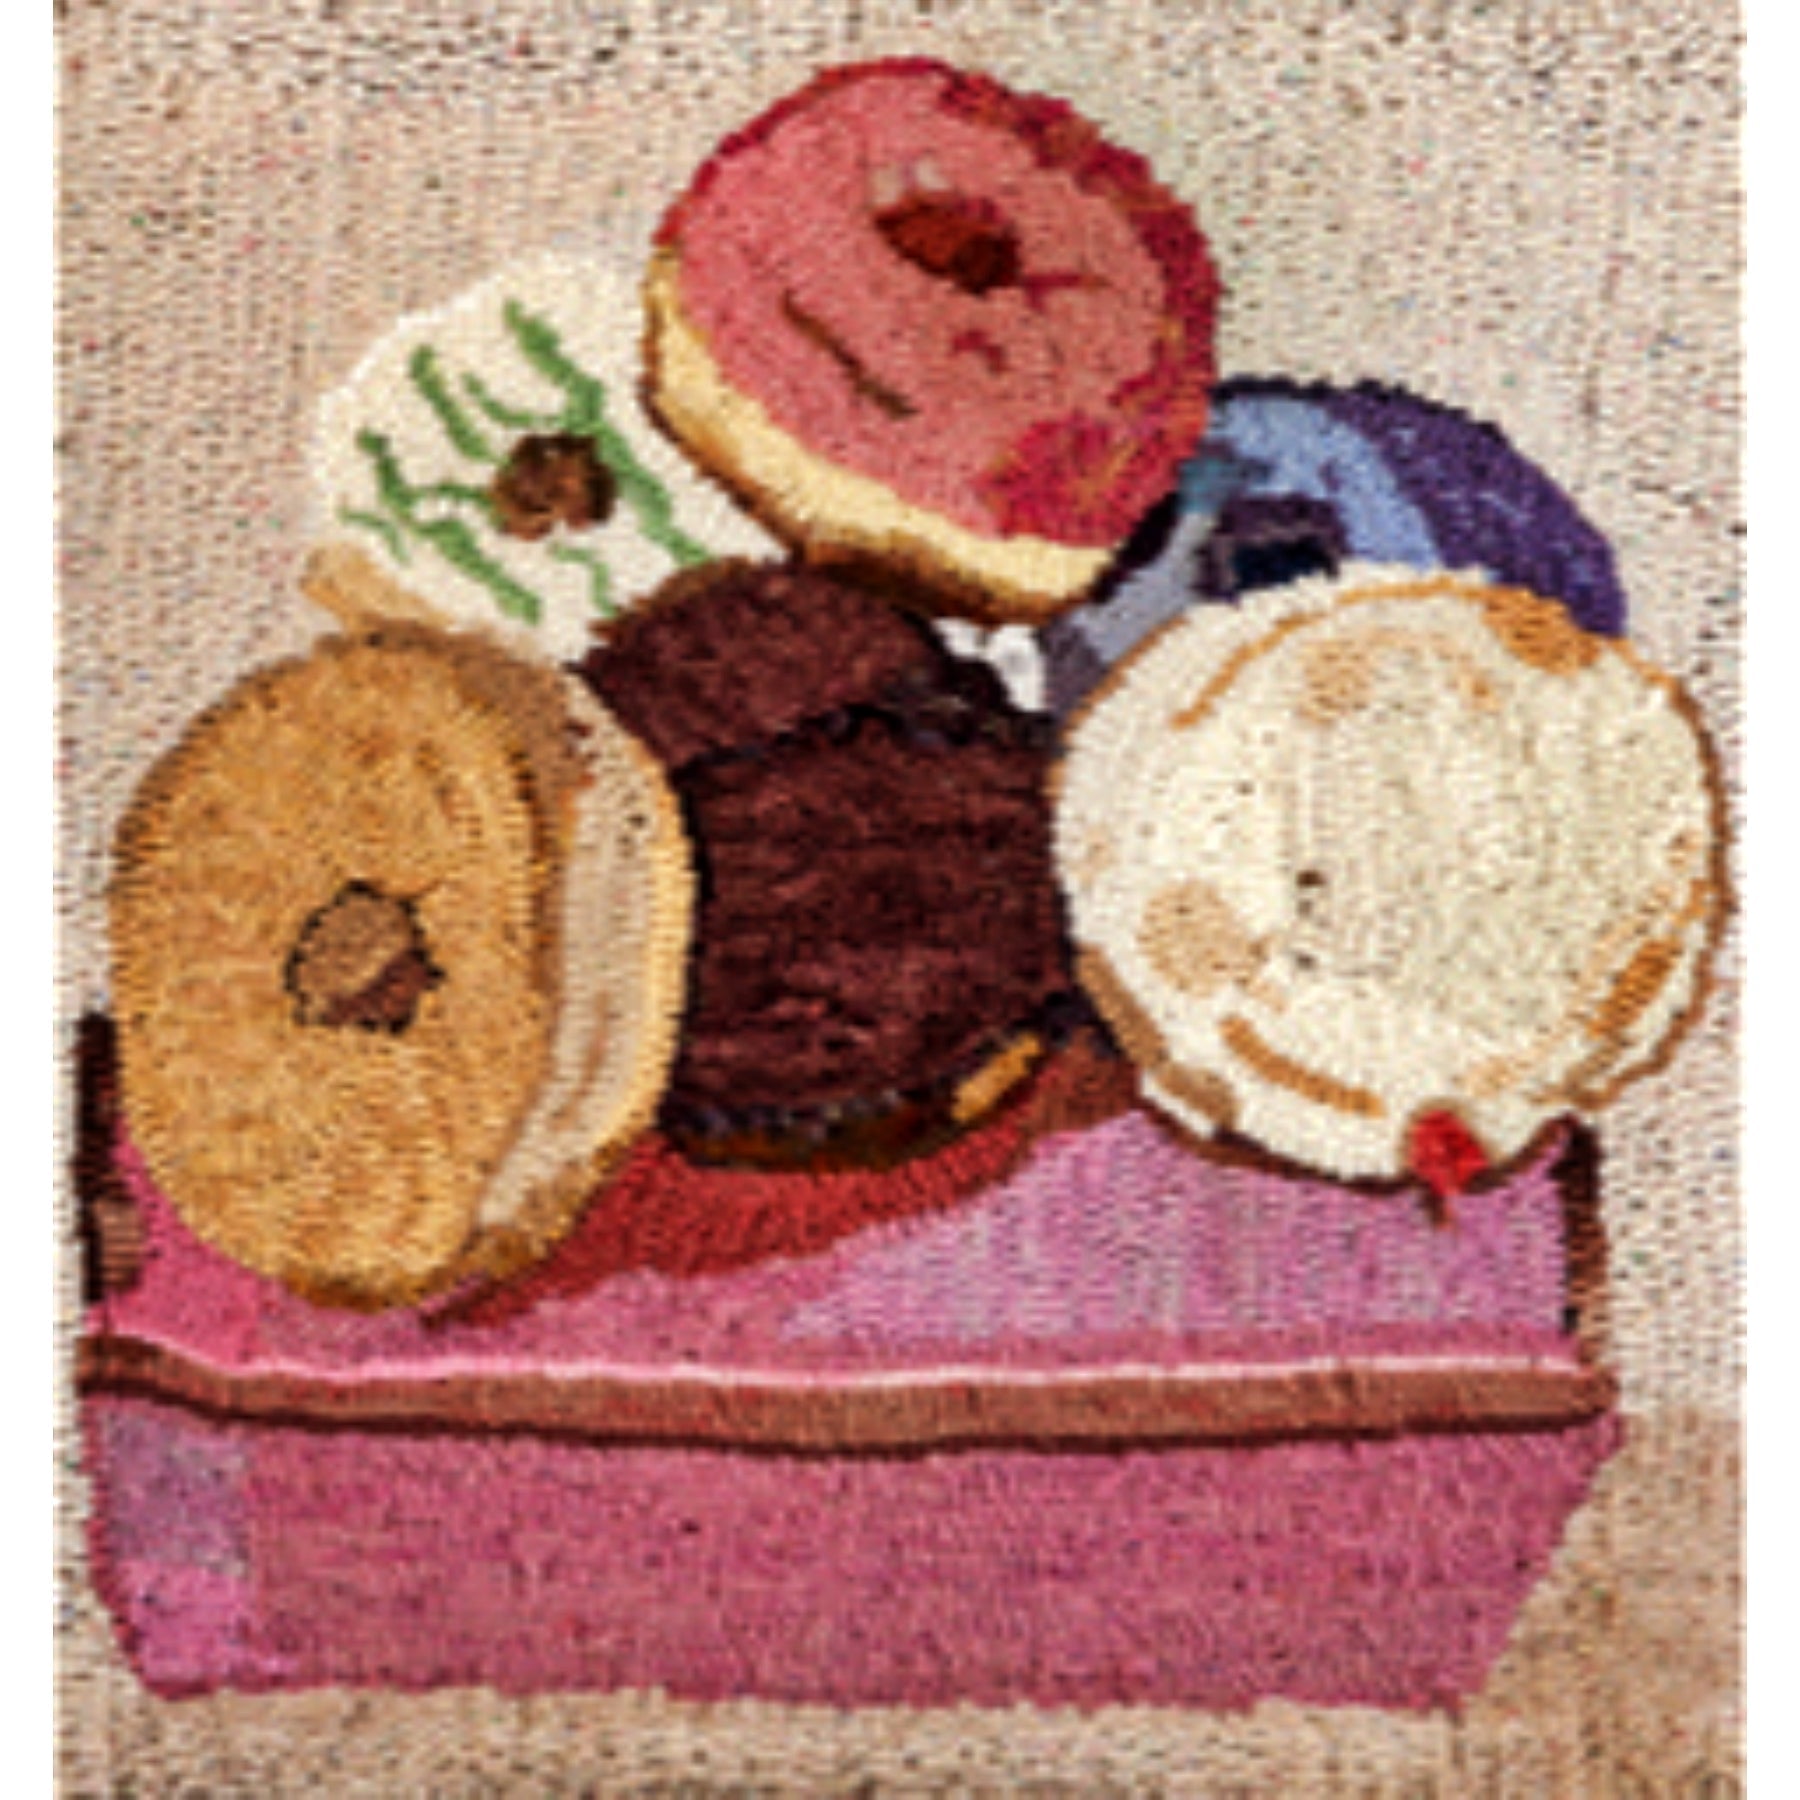 Donut on a Box, rug hooked by Victoria Rudolph